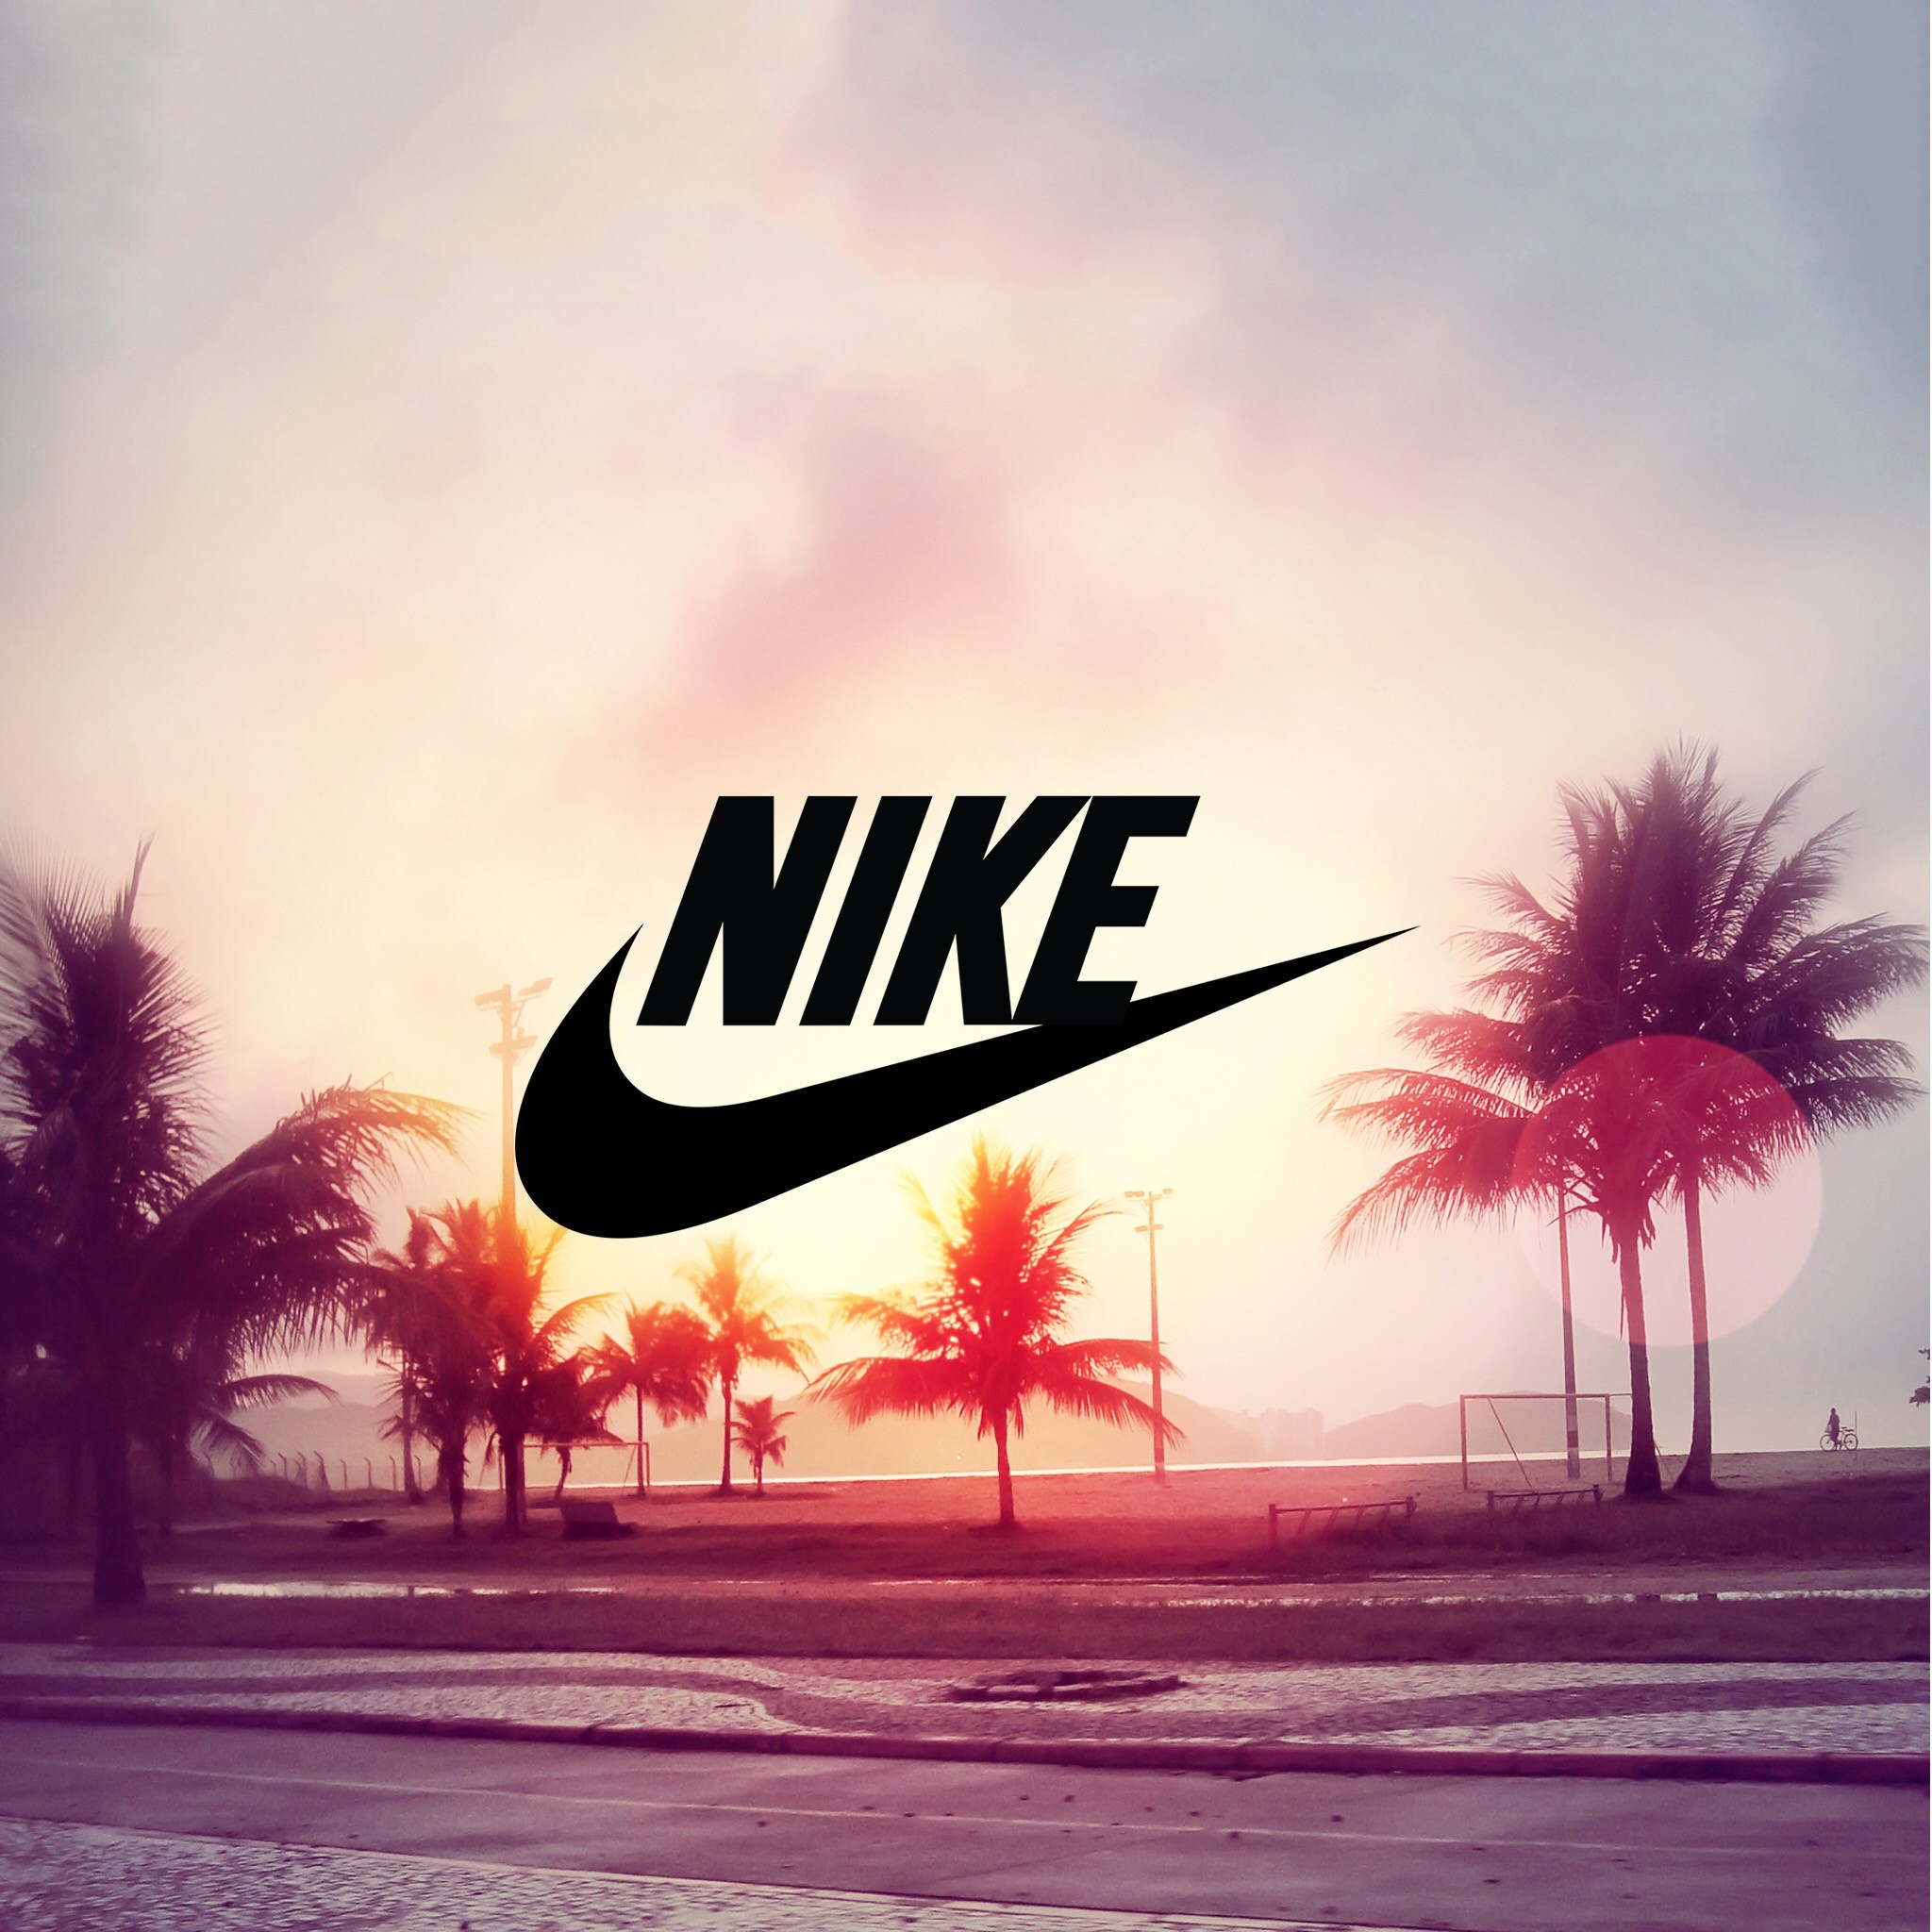 2048x2048 Go places while u still have time... Nike WallpaperNike LogoNike ...